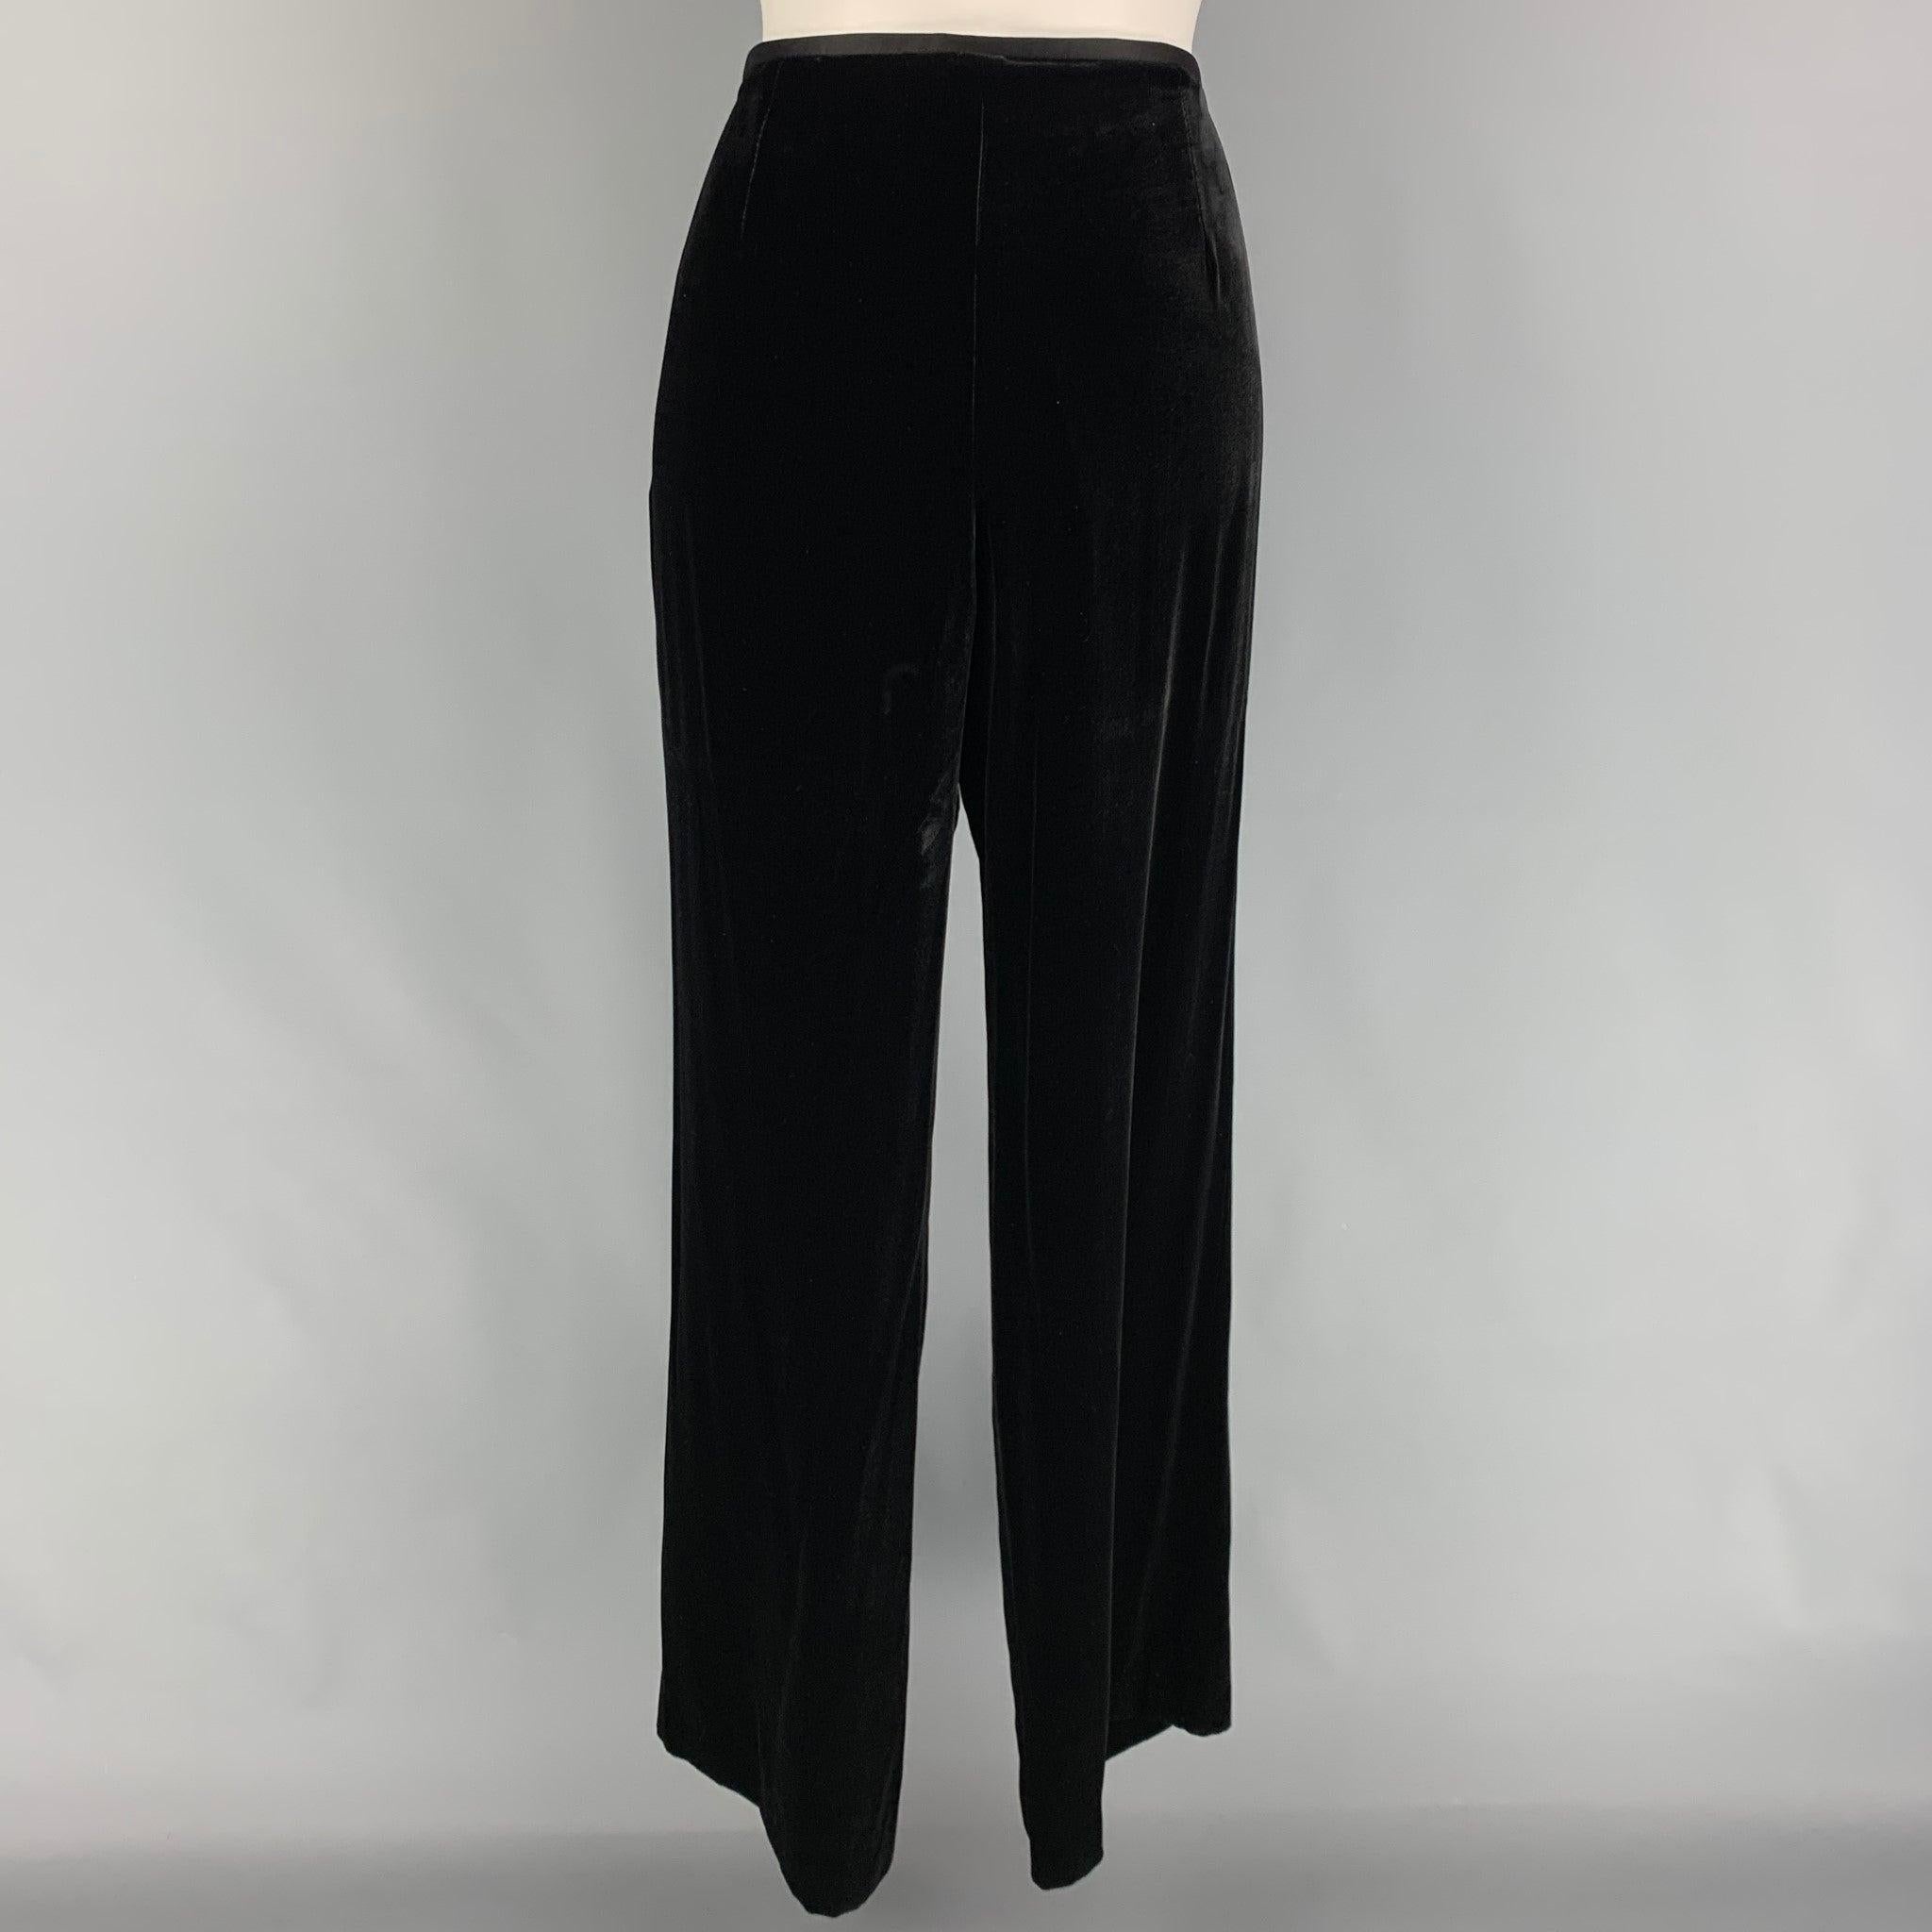 ARMANI COLLEZIONI pants comes in a velvet viscose / silk featuring a wide leg style and a side zipper closure. Made in Italy.
New With Tags.
 

Marked:   8 

Measurements: 
  Waist: 31 inches  Rise: 10.5 inches  Inseam: 31 inches 
  
  
 
Reference: